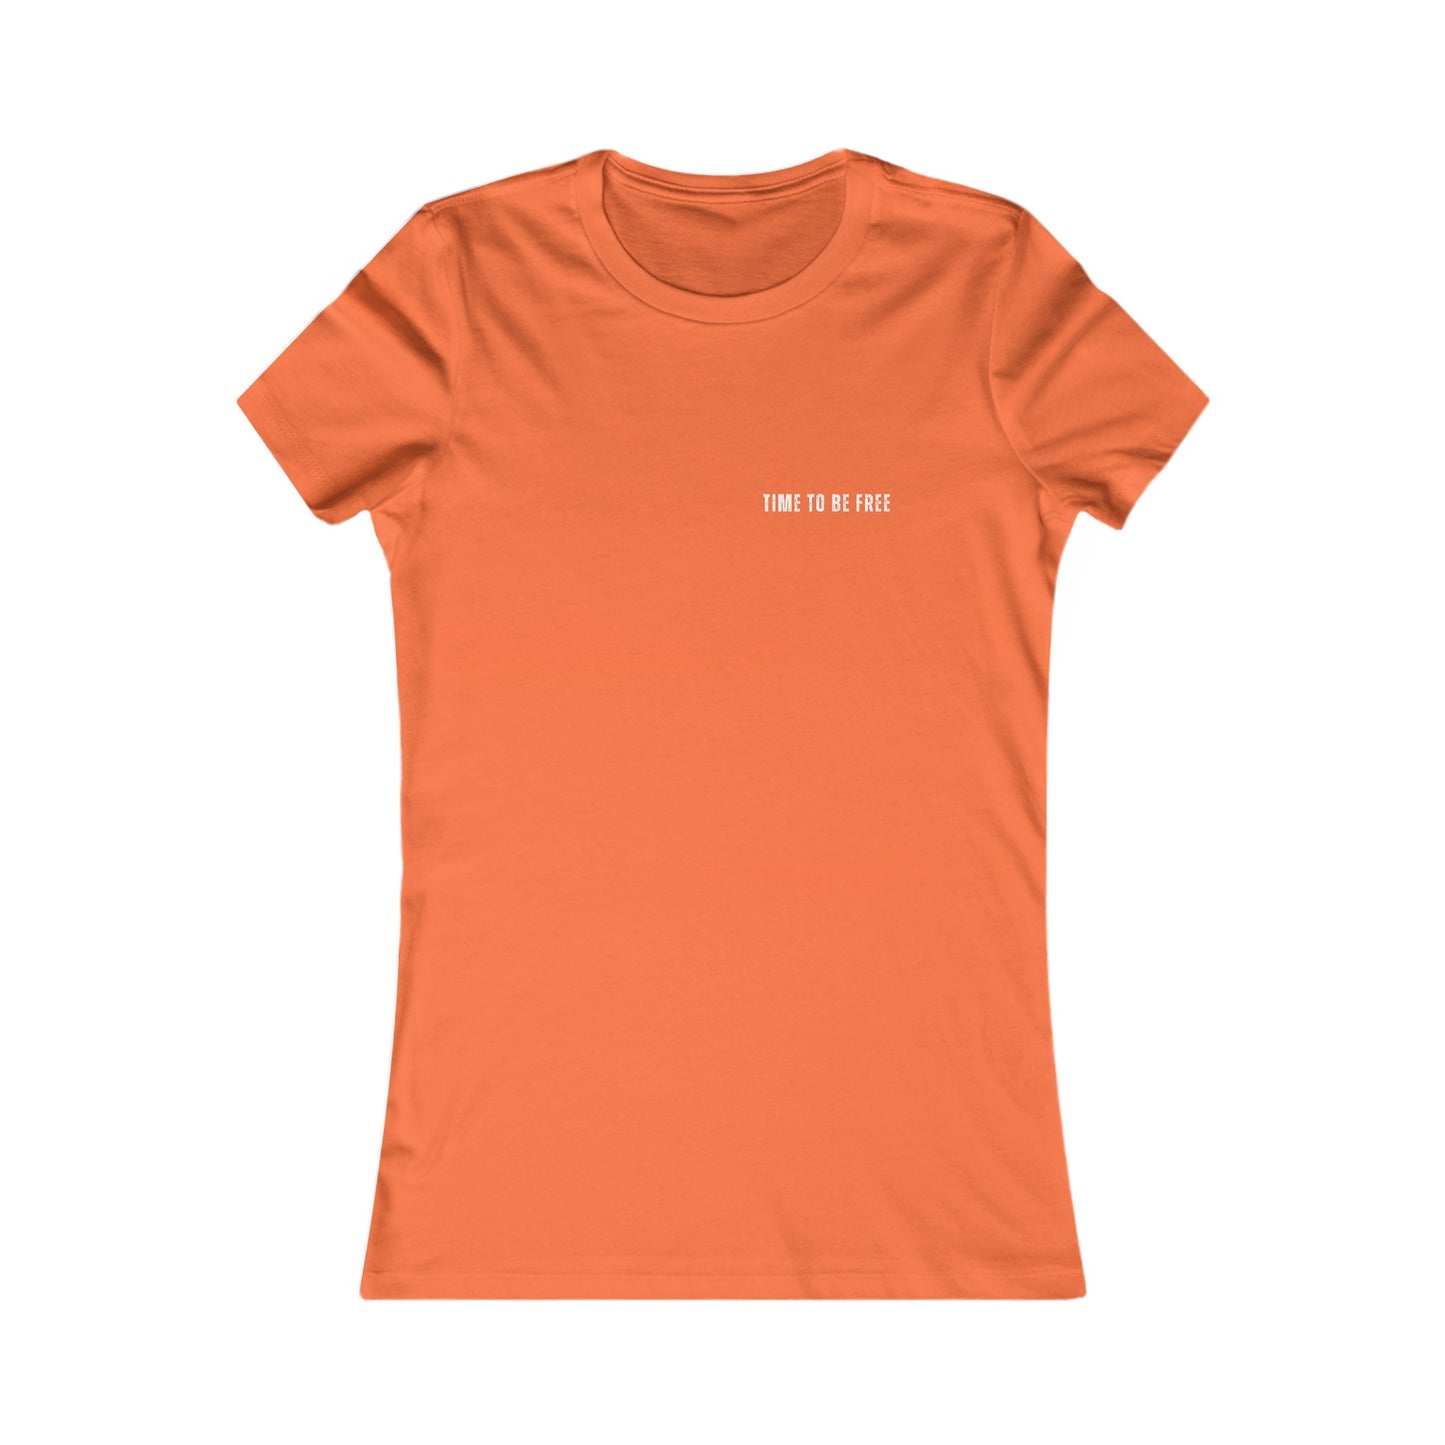 INSPIRED Time To Be Free W WOMEN'S Favorite Tee